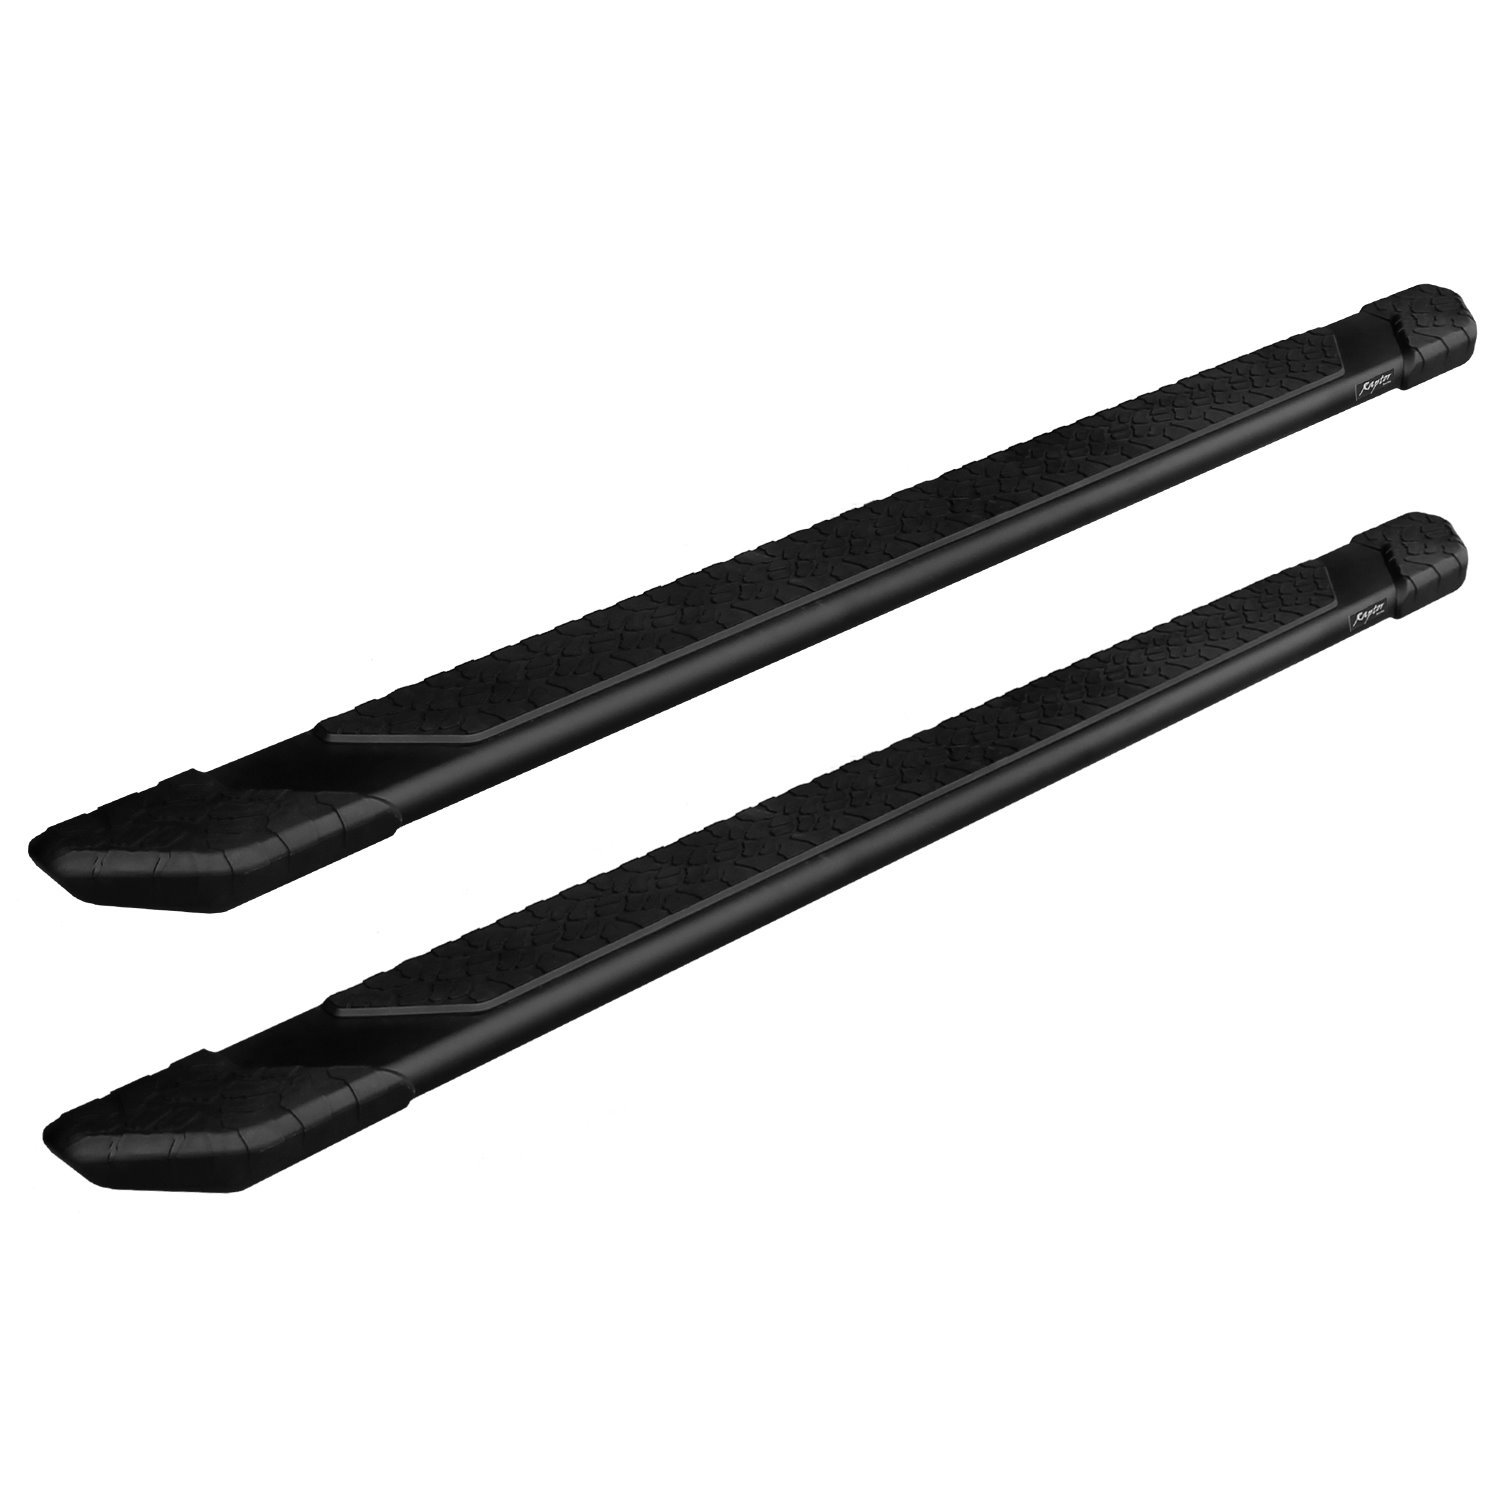 1902-0073BT 5 in Tread Step Slide Track Running Boards, Black Aluminum, Fits Select Dodge Ram 1500 New Body Style